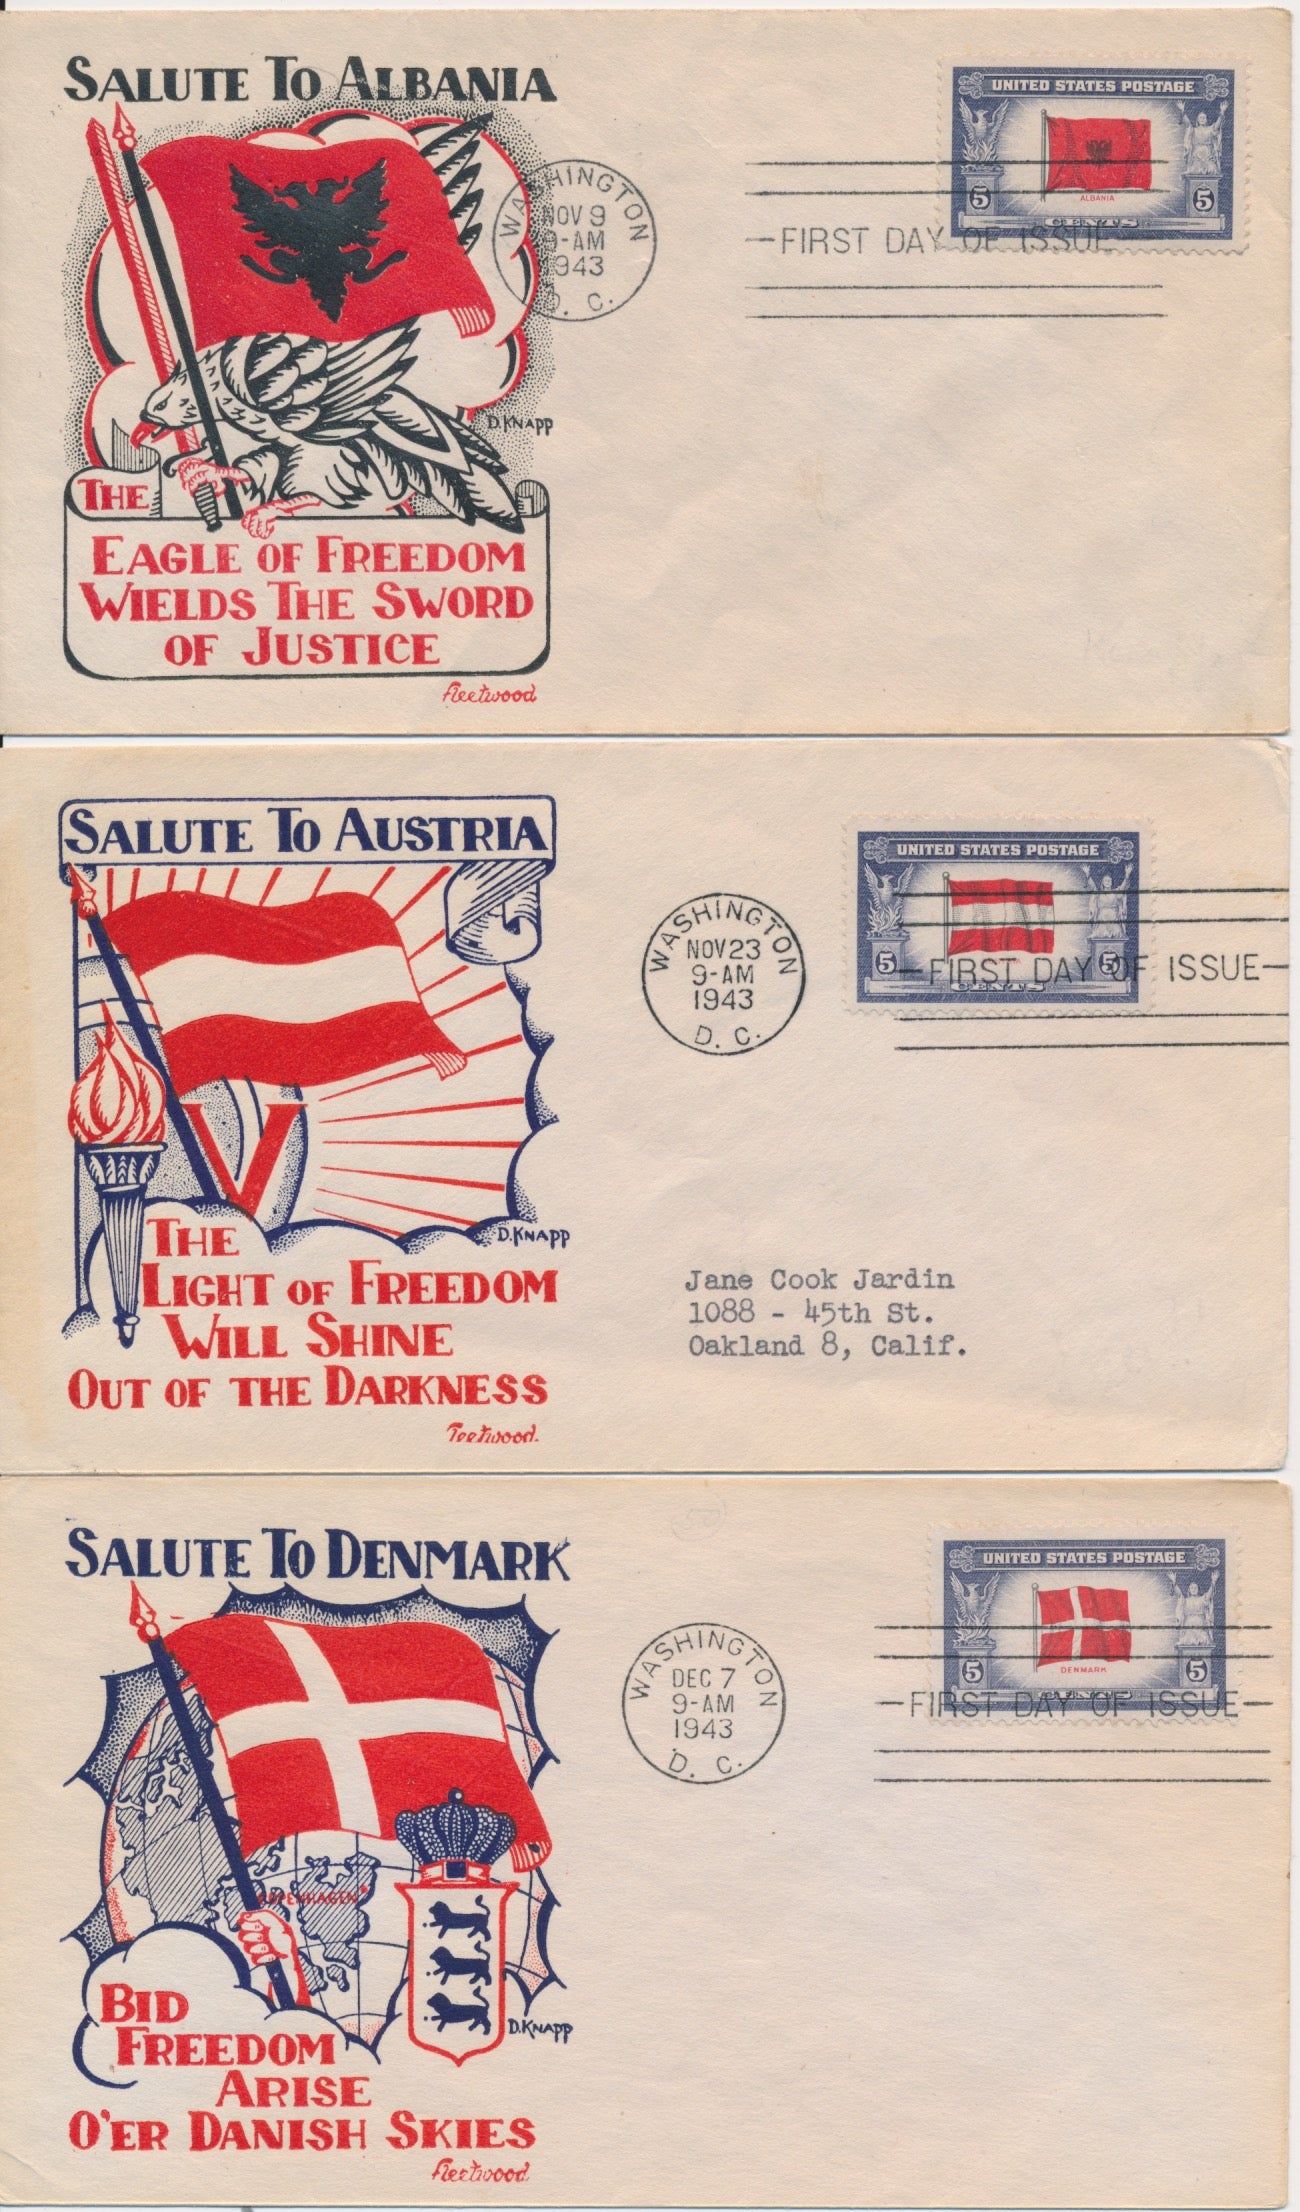 #909-921 Over-run Countries set of 13 Fleetwood DW Knapp cachet First Day covers